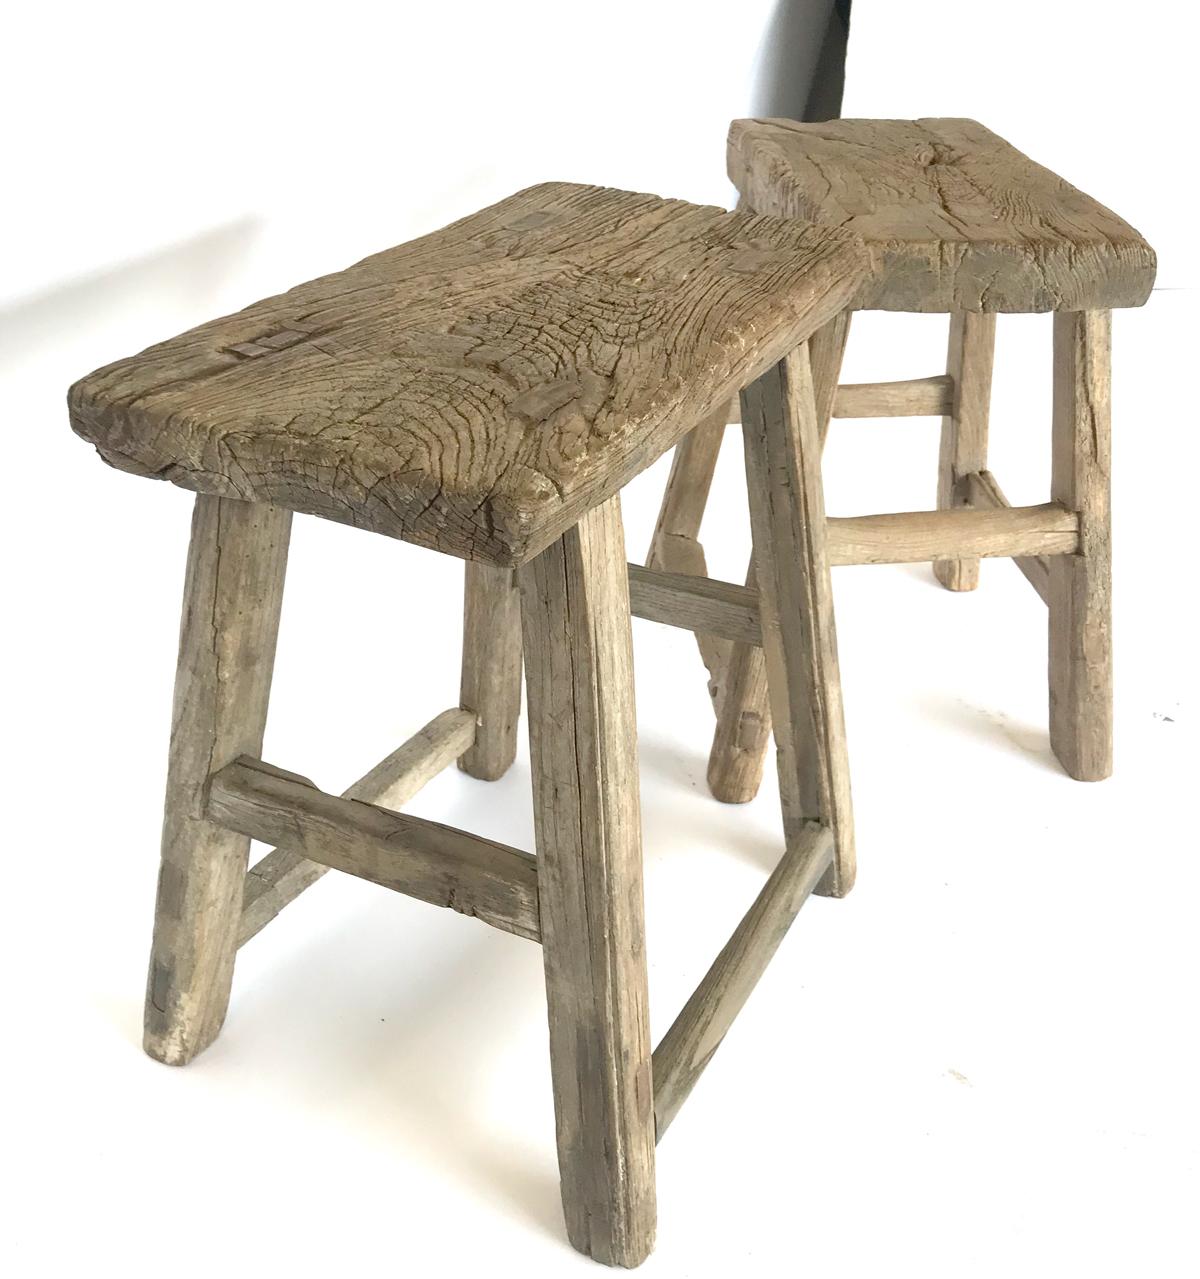 19th century Chinese elm stools with beautiful rustic patina.
Only the stool on the right is available. 15.5 x 9.5 x 19.5 H.
